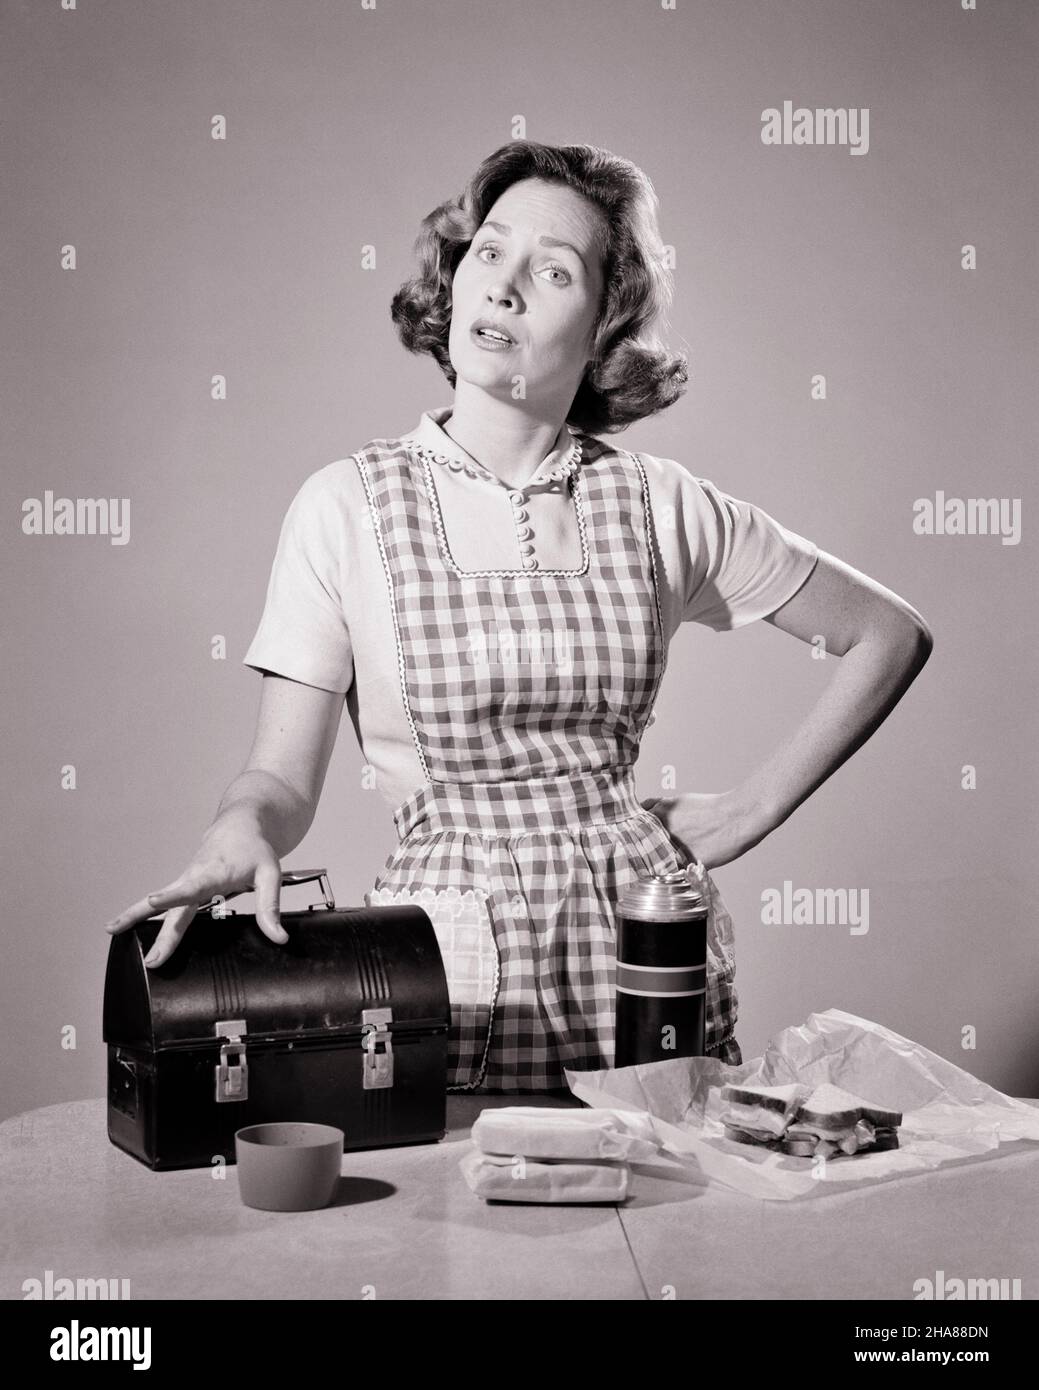 1950s 1960s SERIOUS WOMAN HOUSEWIFE LOOKING AT CAMERA WEARING CHECKERED APRON PREPARING MEAL TO PACK IN LUNCH BOX AND THERMOS - h3319 DEB001 HARS 1 FACIAL YOUNG ADULT WORRY LIFESTYLE FEMALES MOODY PACK HOME LIFE PREPARING HALF-LENGTH LADIES PERSONS CARING CONFIDENCE EXPRESSIONS TROUBLED B&W CONCERNED SADNESS EYE CONTACT HOMEMAKER HOMEMAKERS PAIL AND THERMOS PRIDE IN TO HOUSEWIVES MOOD CONCEPTUAL GLUM STYLISH SUPPORT DEB001 CHECKERED MISERABLE YOUNG ADULT WOMAN BLACK AND WHITE CAUCASIAN ETHNICITY OLD FASHIONED Stock Photo